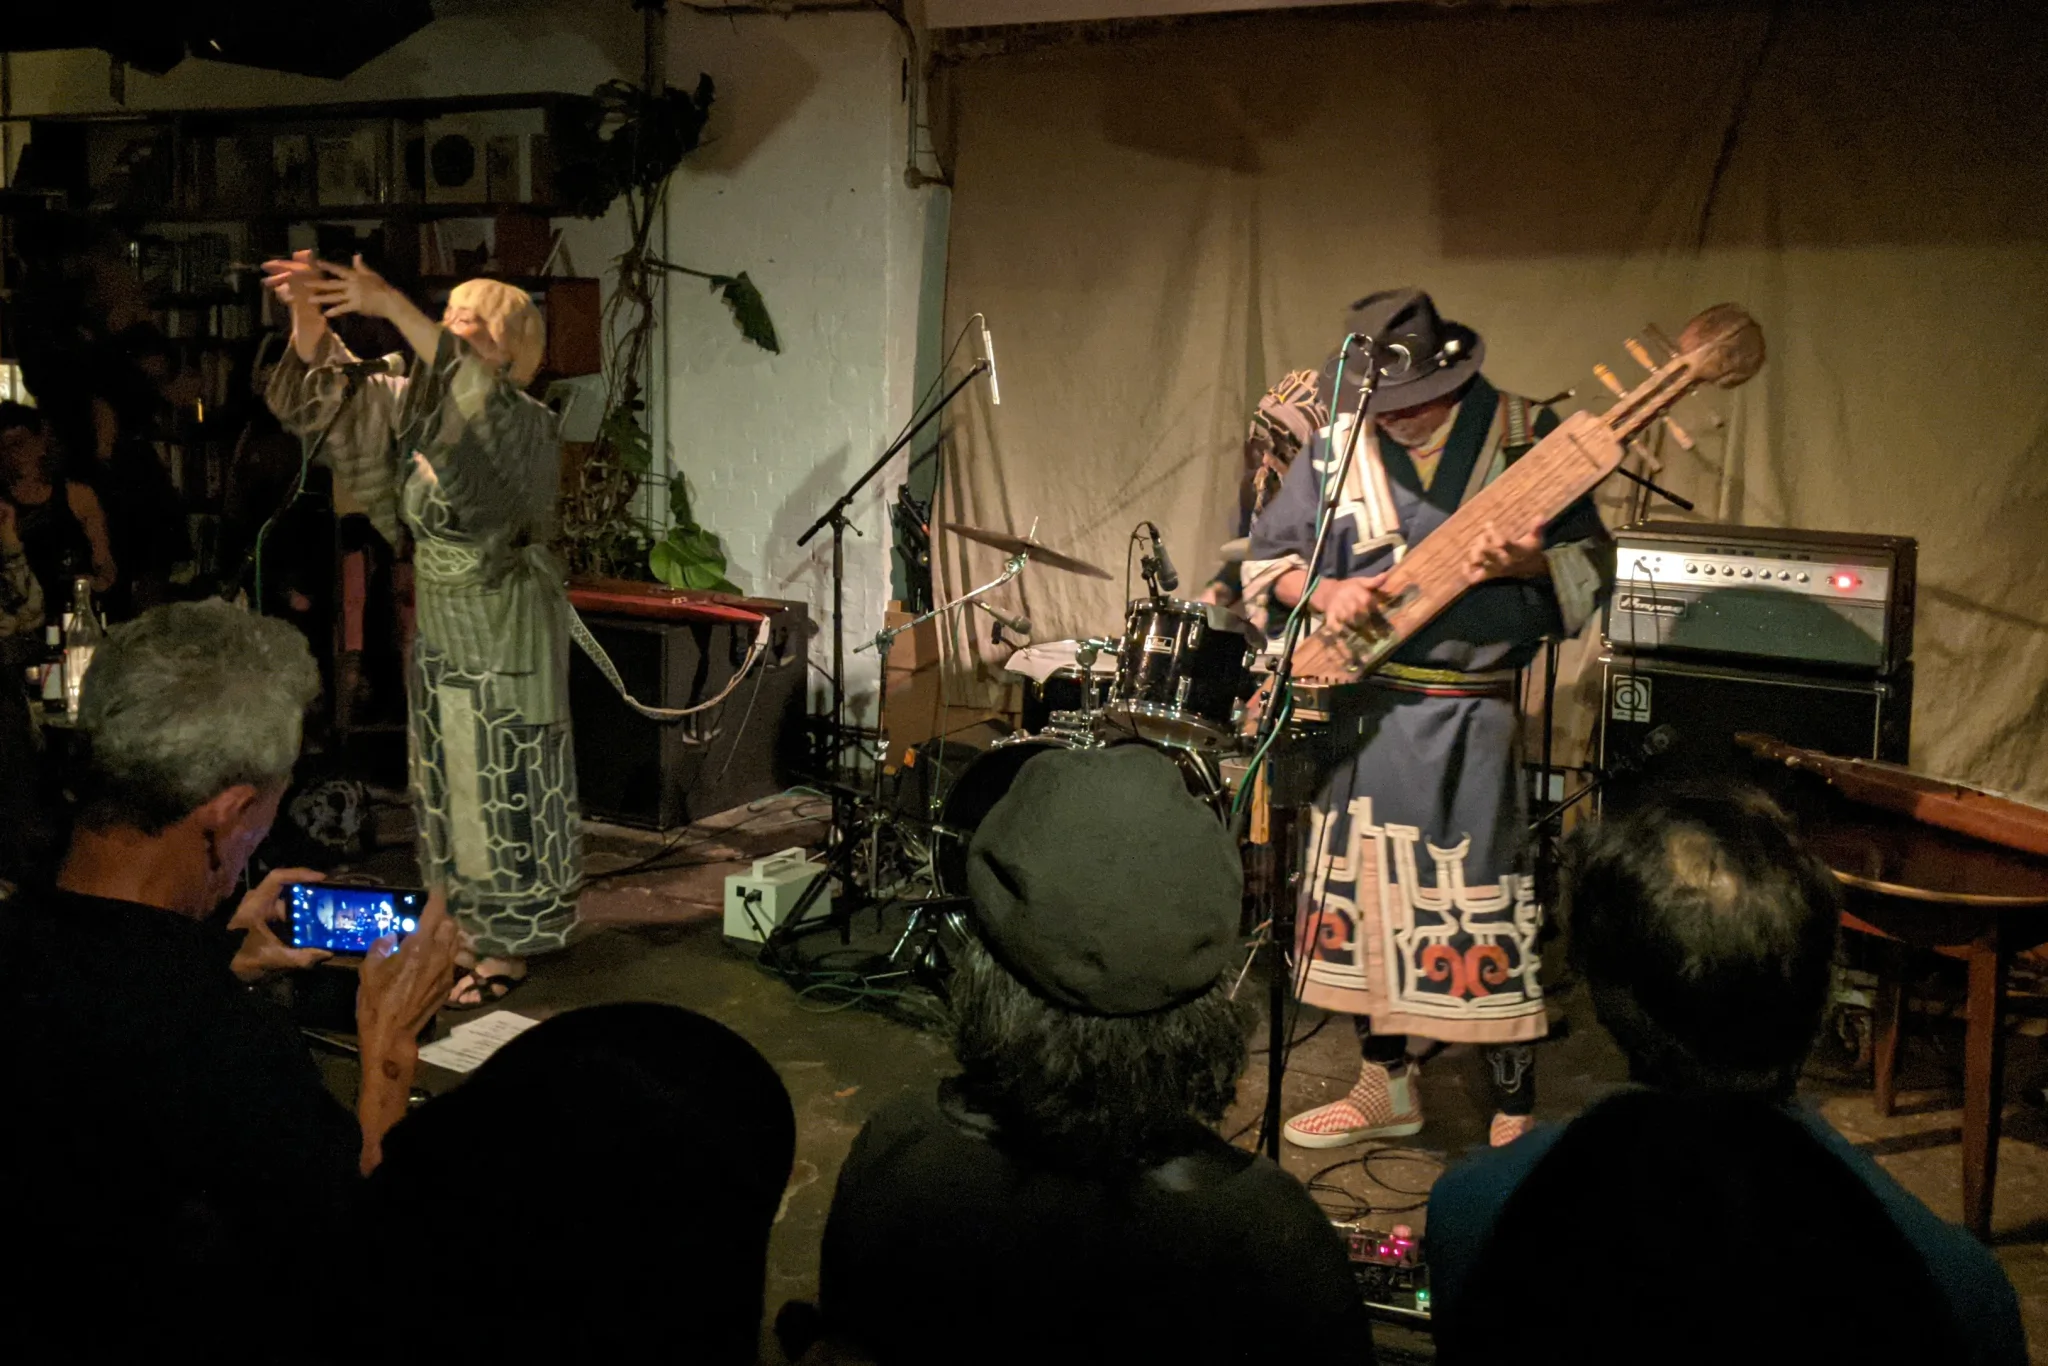 Musicians in Ainu dress on stage. There is a drummer at the back. On the left, a singer has her arms raised. On the right, a man plays the tonkori.